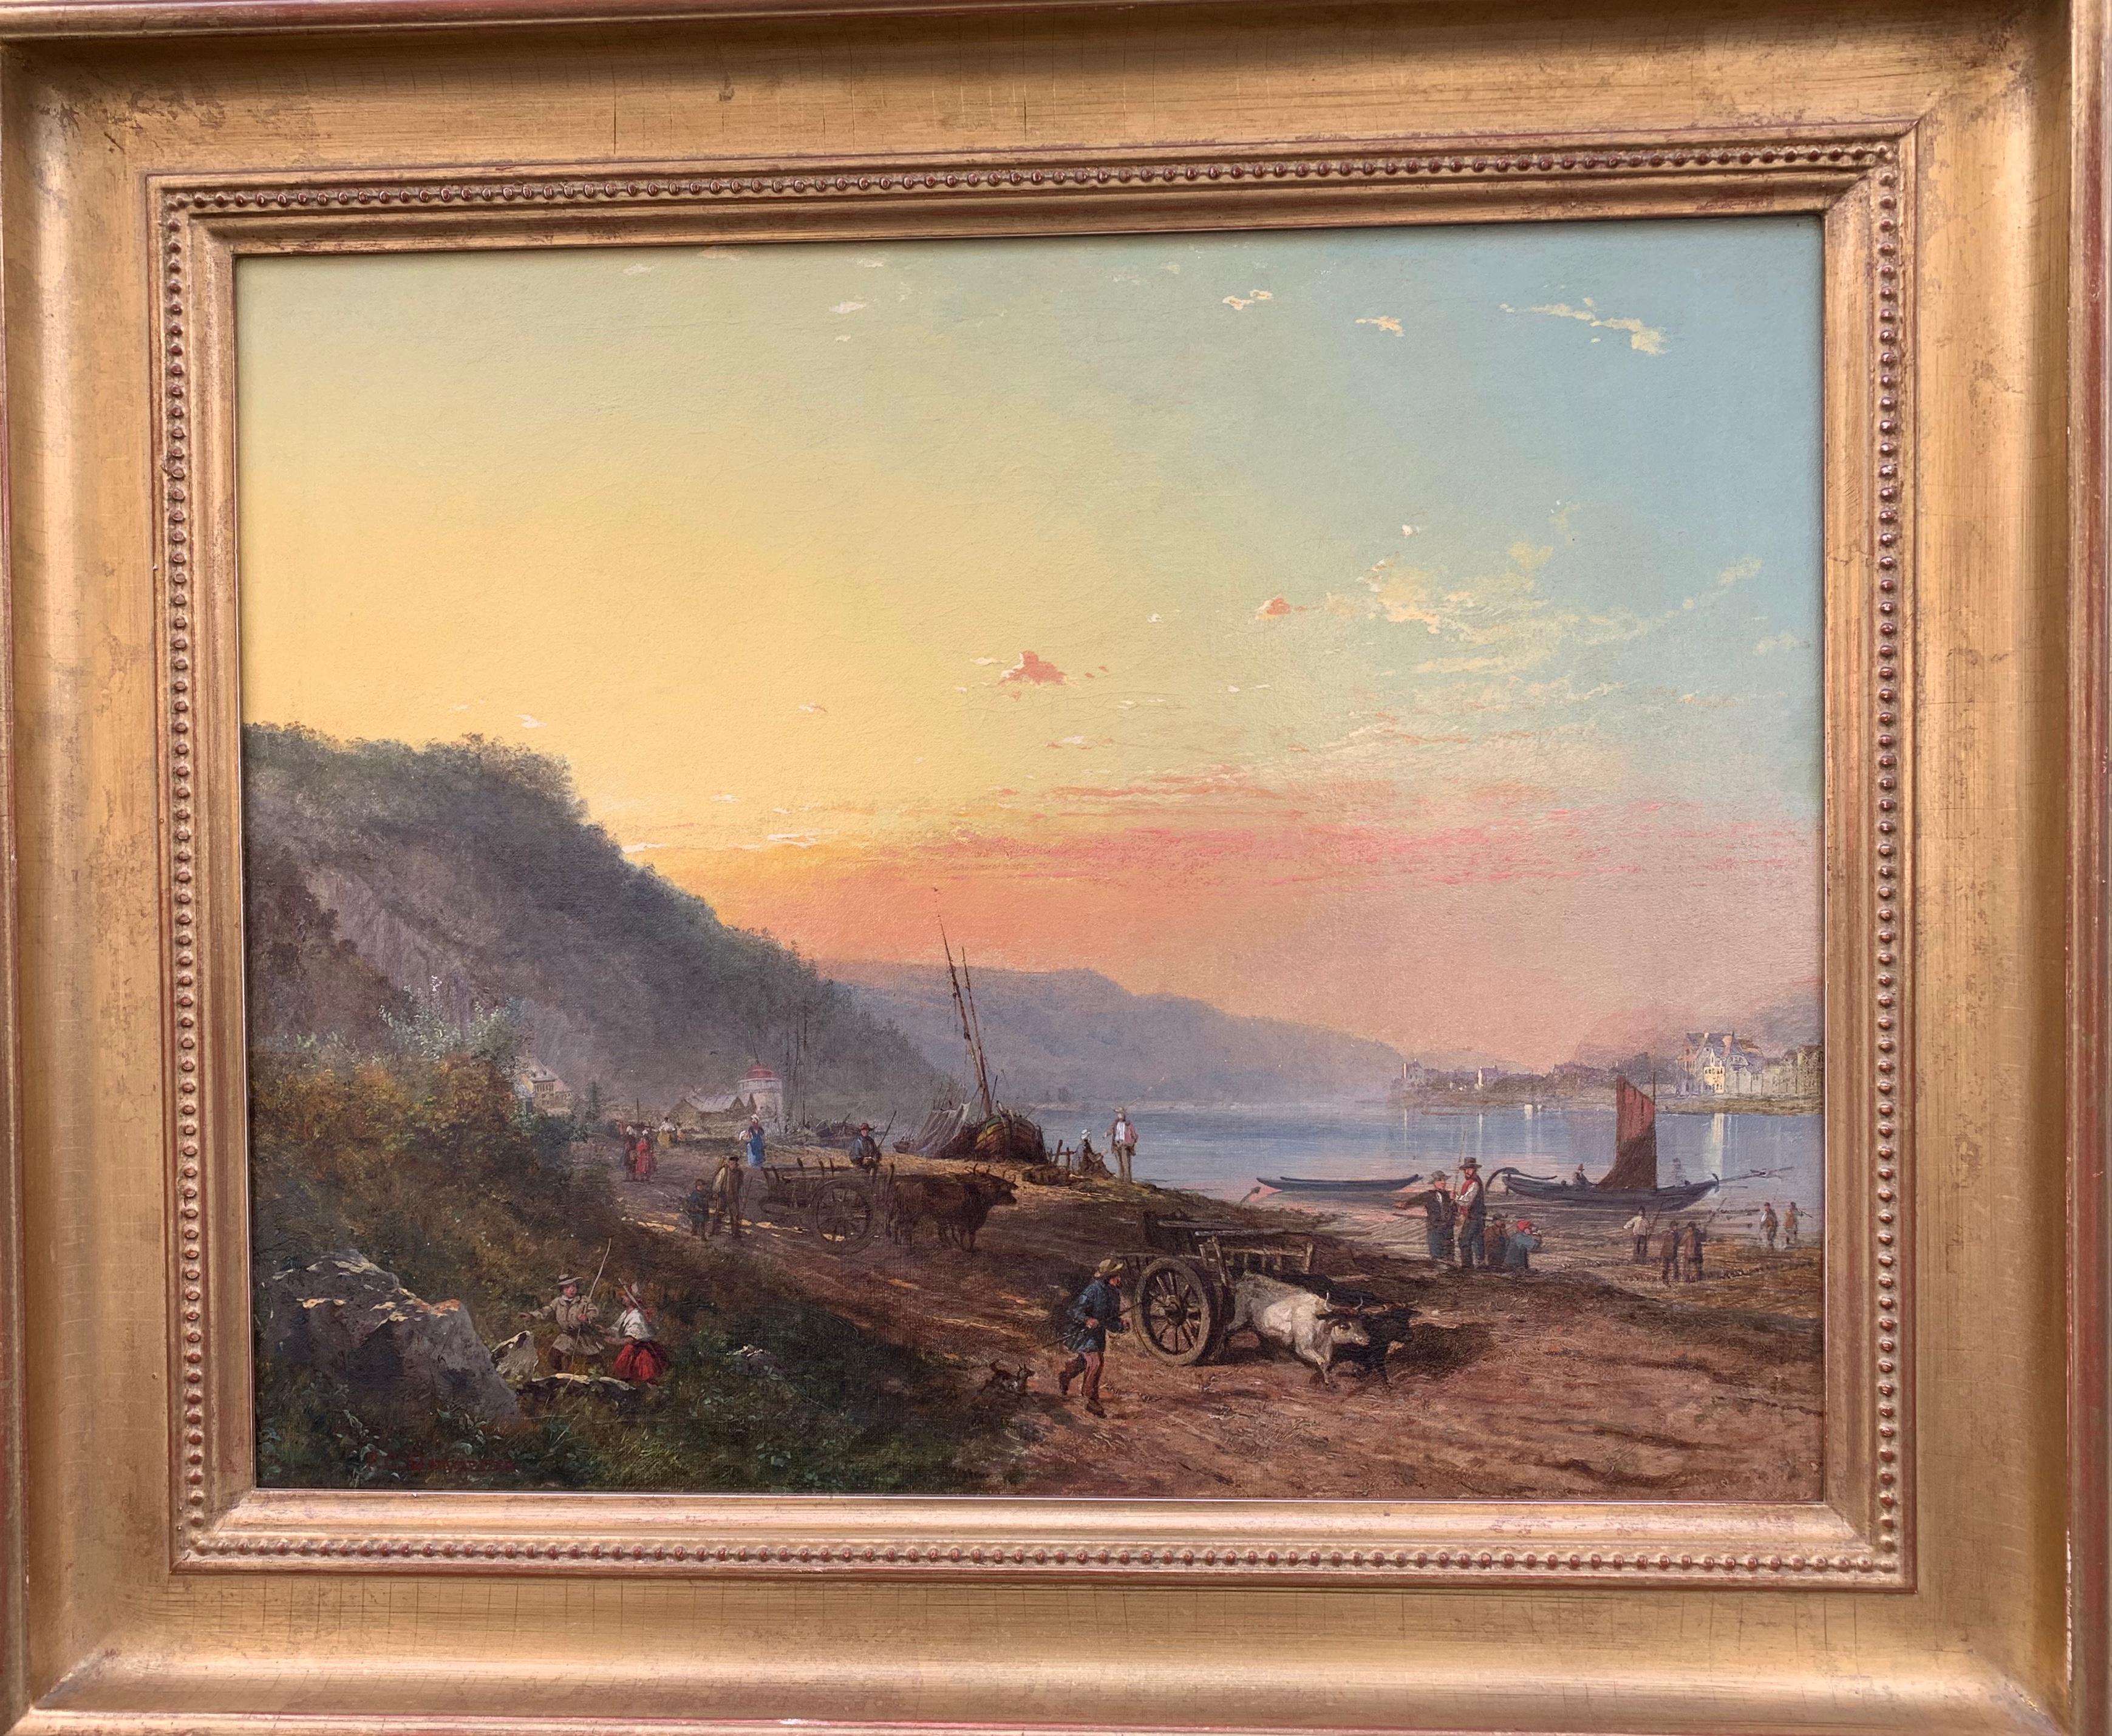 Oil on canvas depicting a scene of Fishermen by a lake, Dutch landscape.

Signed on the lower left corner of Pieter Cornelis Dommersen.

Painter of Dutch seas and landscapes, in London at the end of the 19th century.

He exhibited between 1865 and